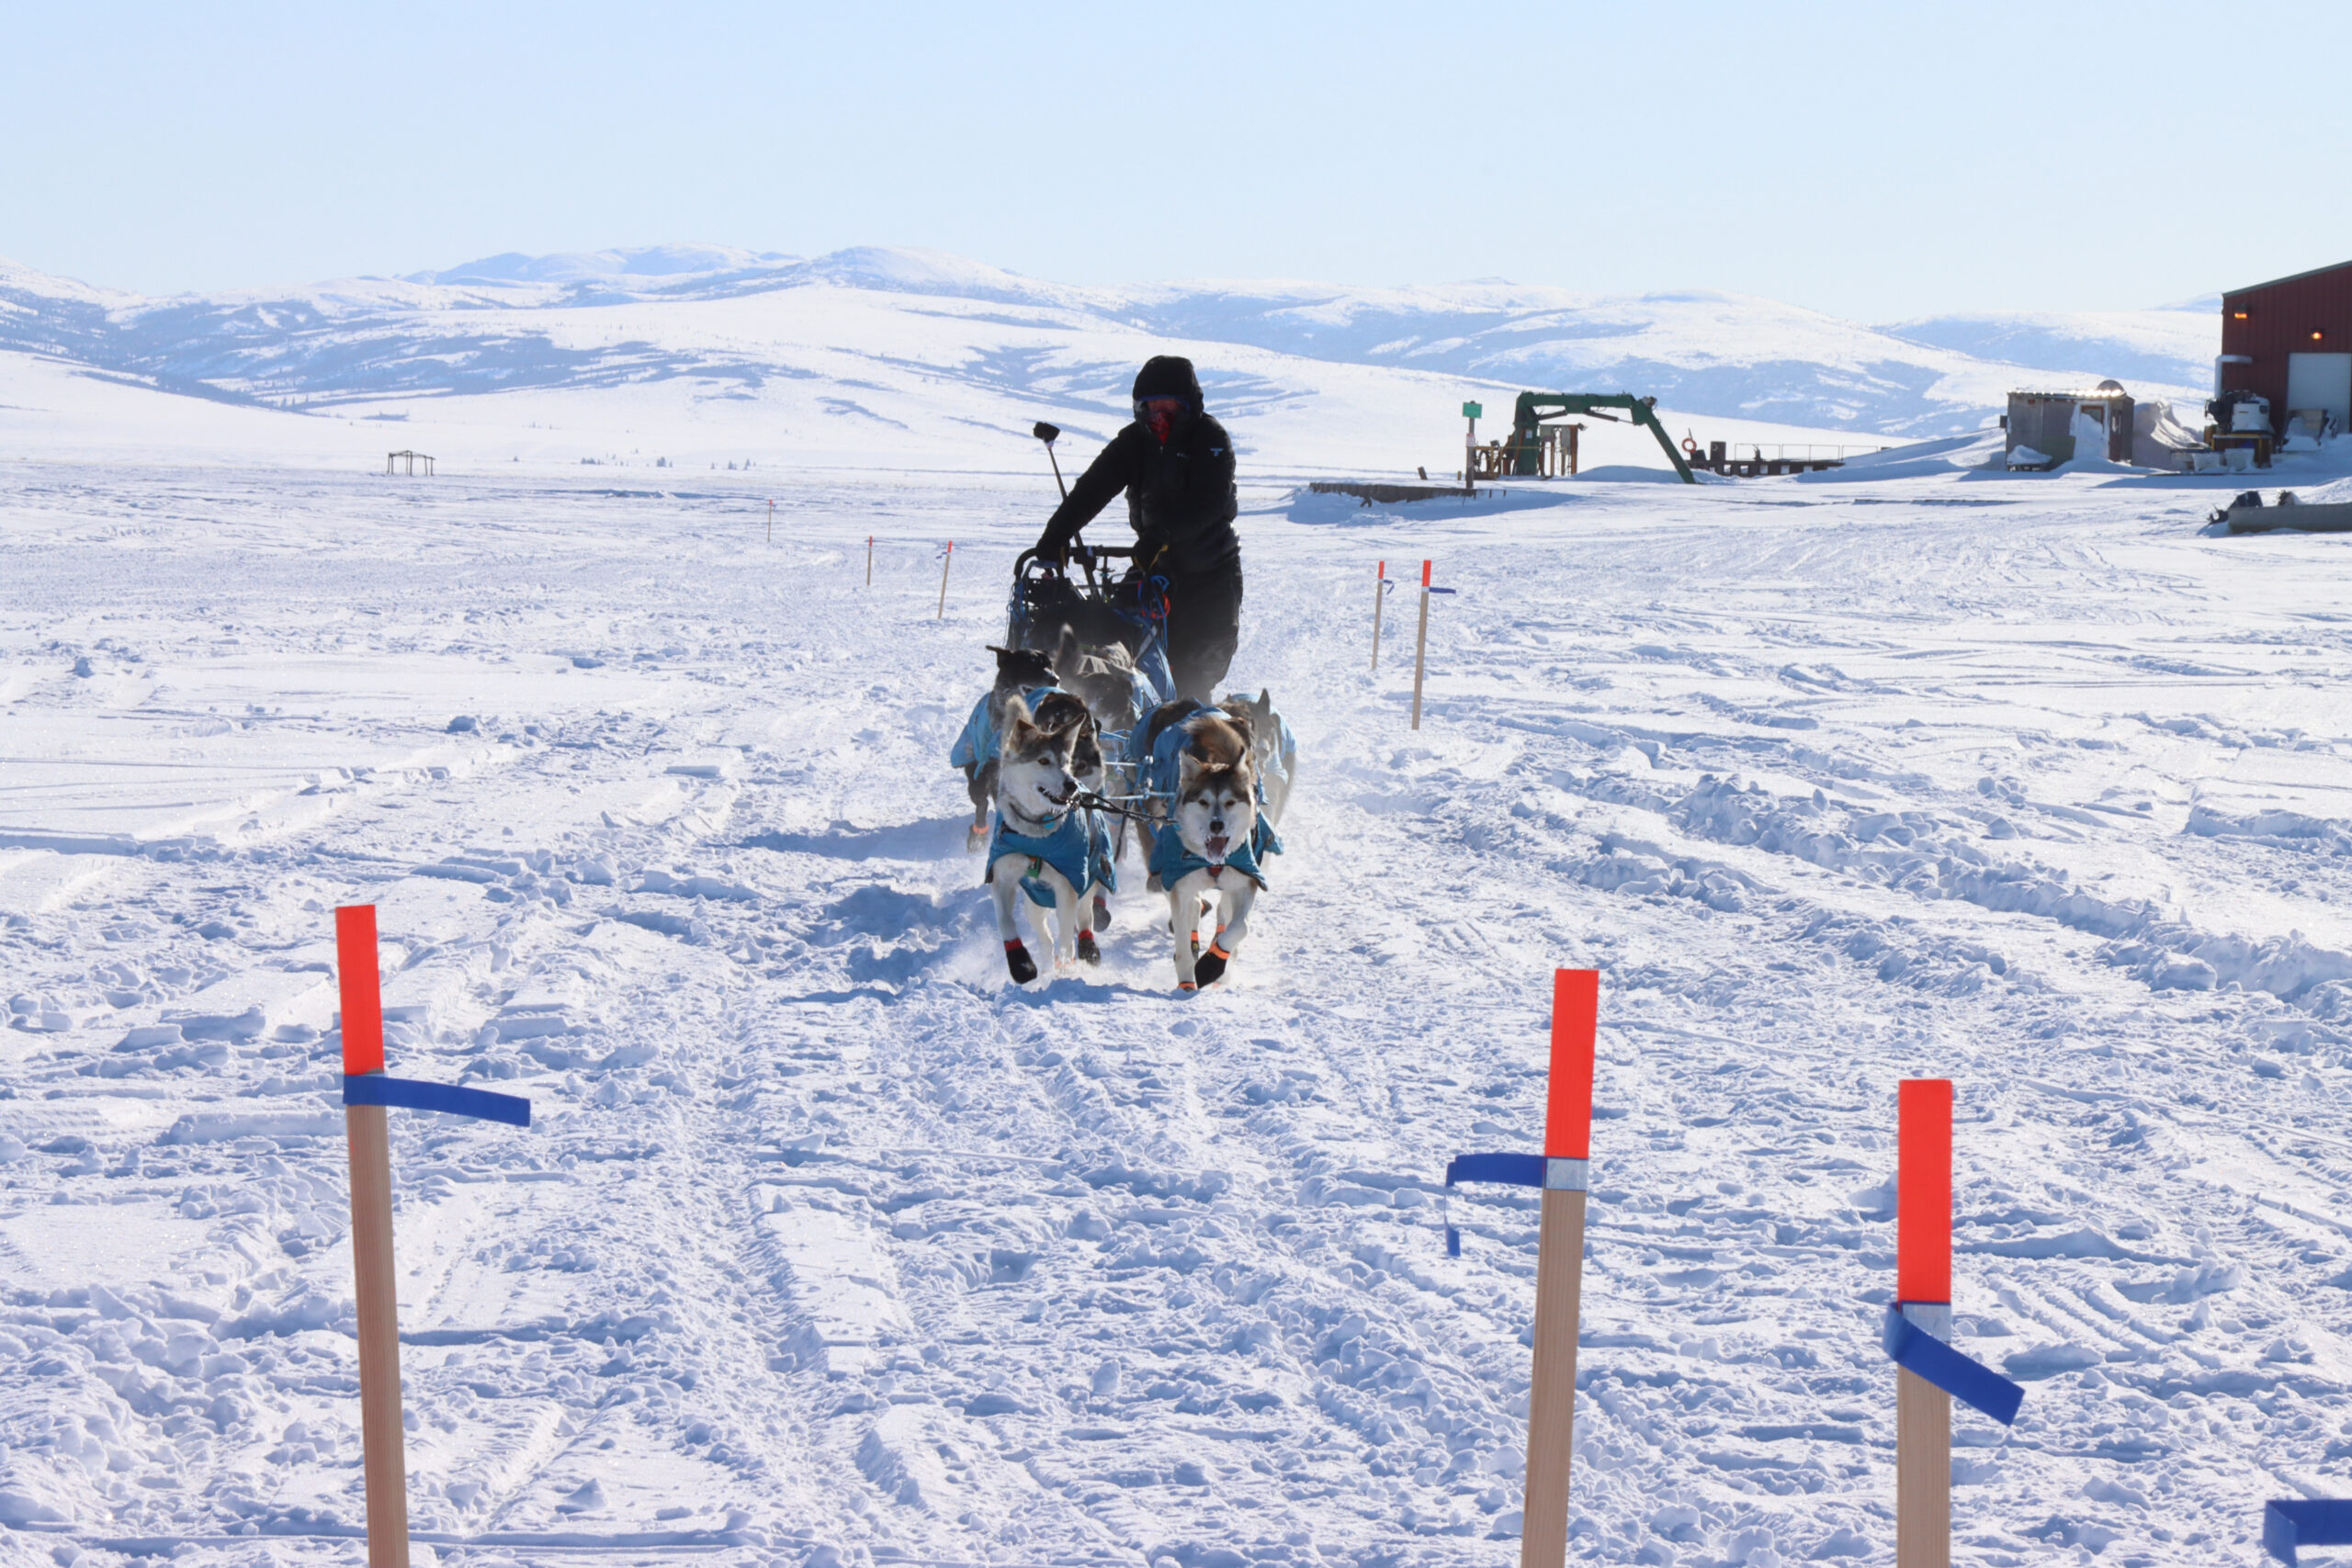 sled dogs race into a checkpoint